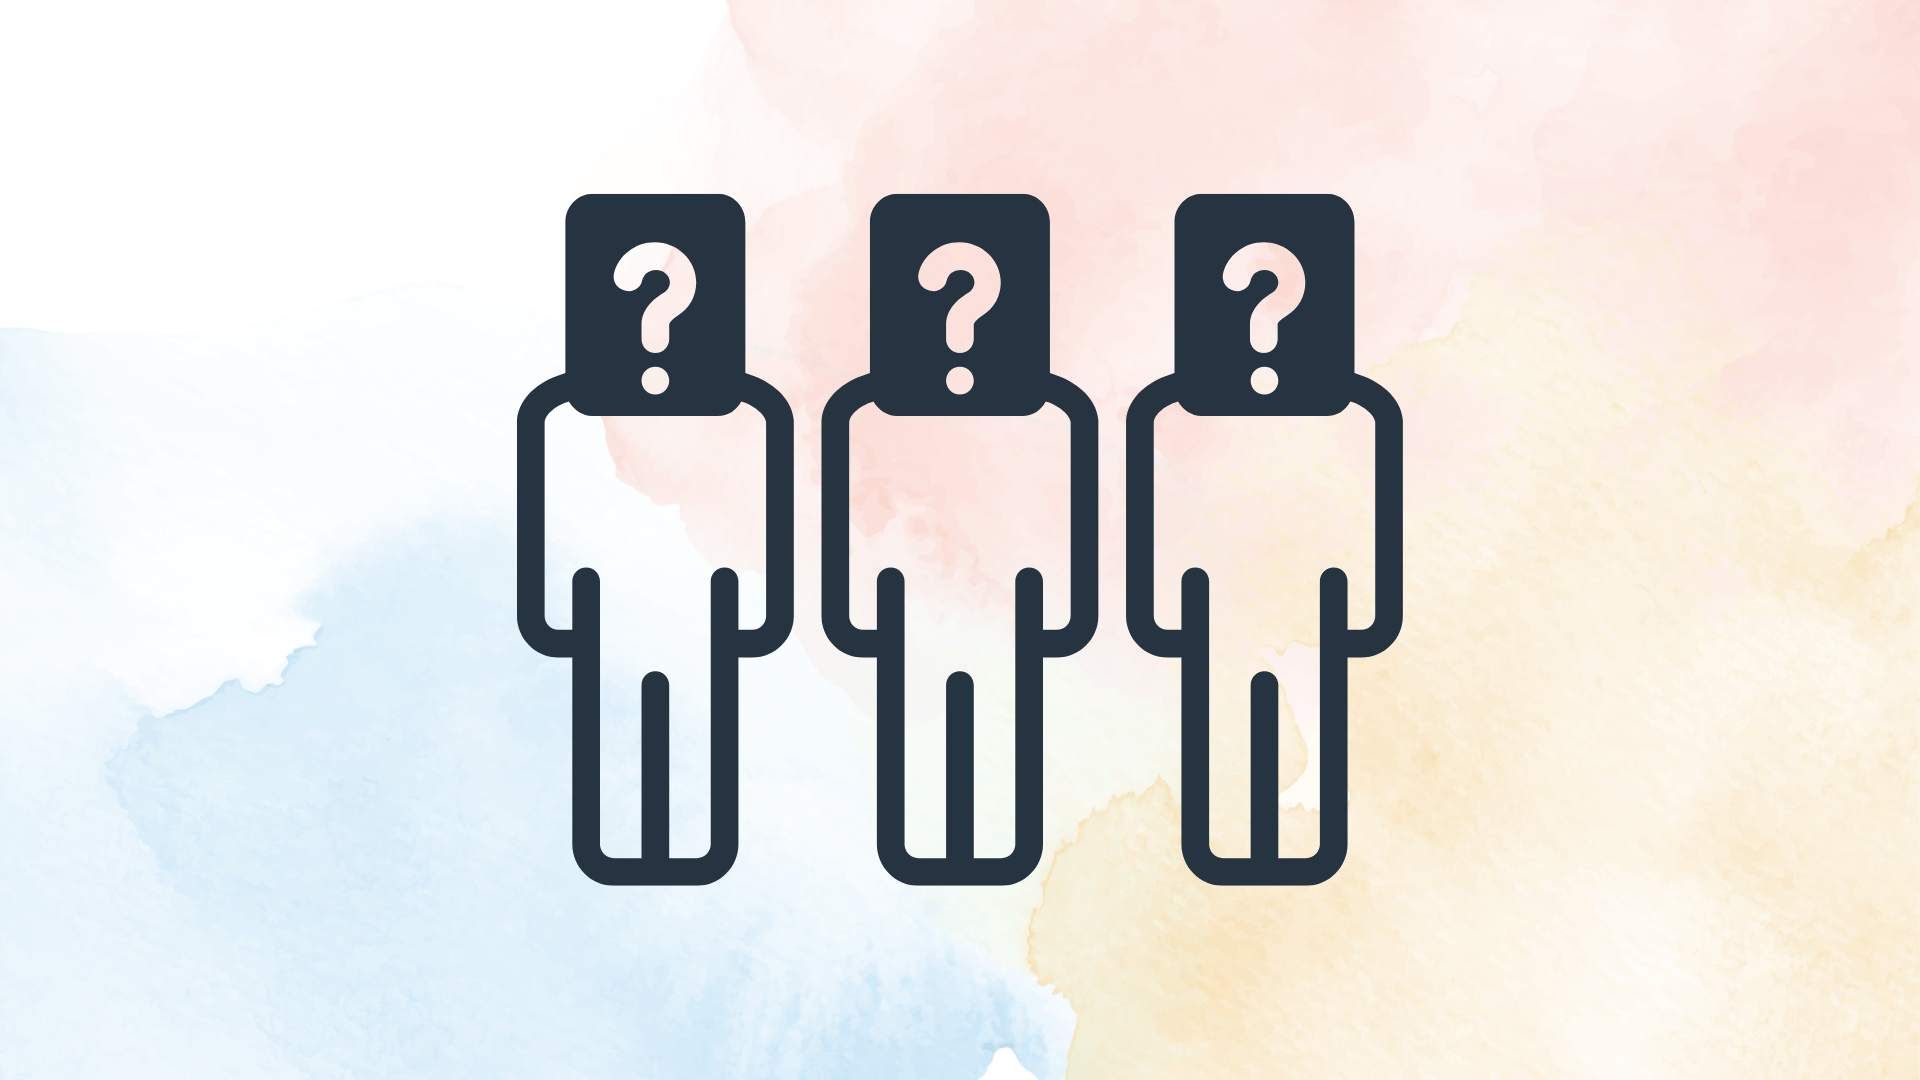 Three stylized silhouettes of people, who have a big question mark as their head. The background is white with some light blue, yellow and red watercolor drops.